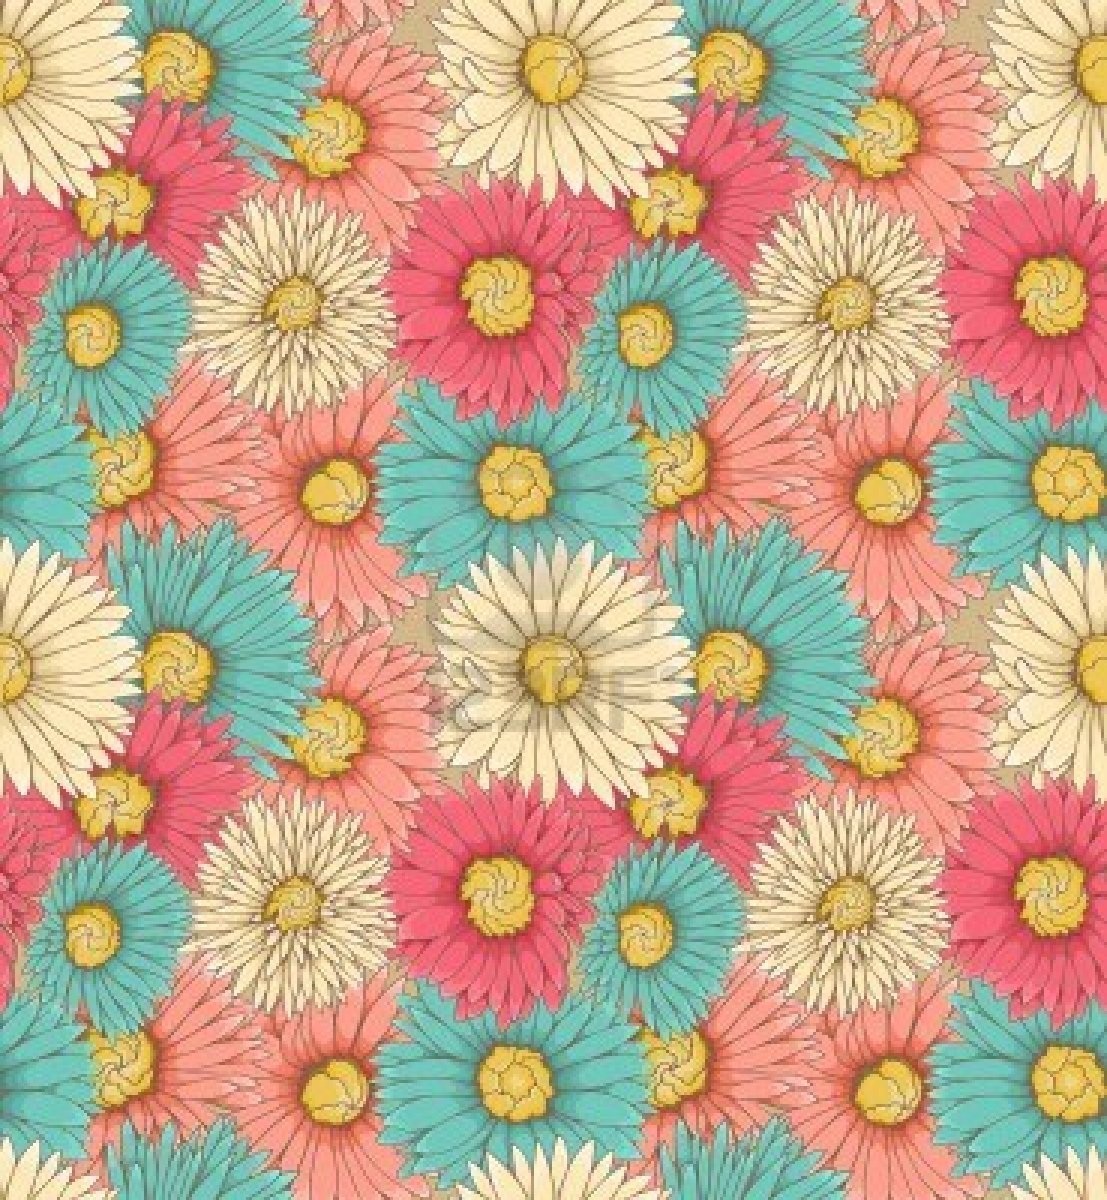 Floral Background Iphone Pinterest - Flowers Tumblr Backgrounds - 1107x1200  Wallpaper 